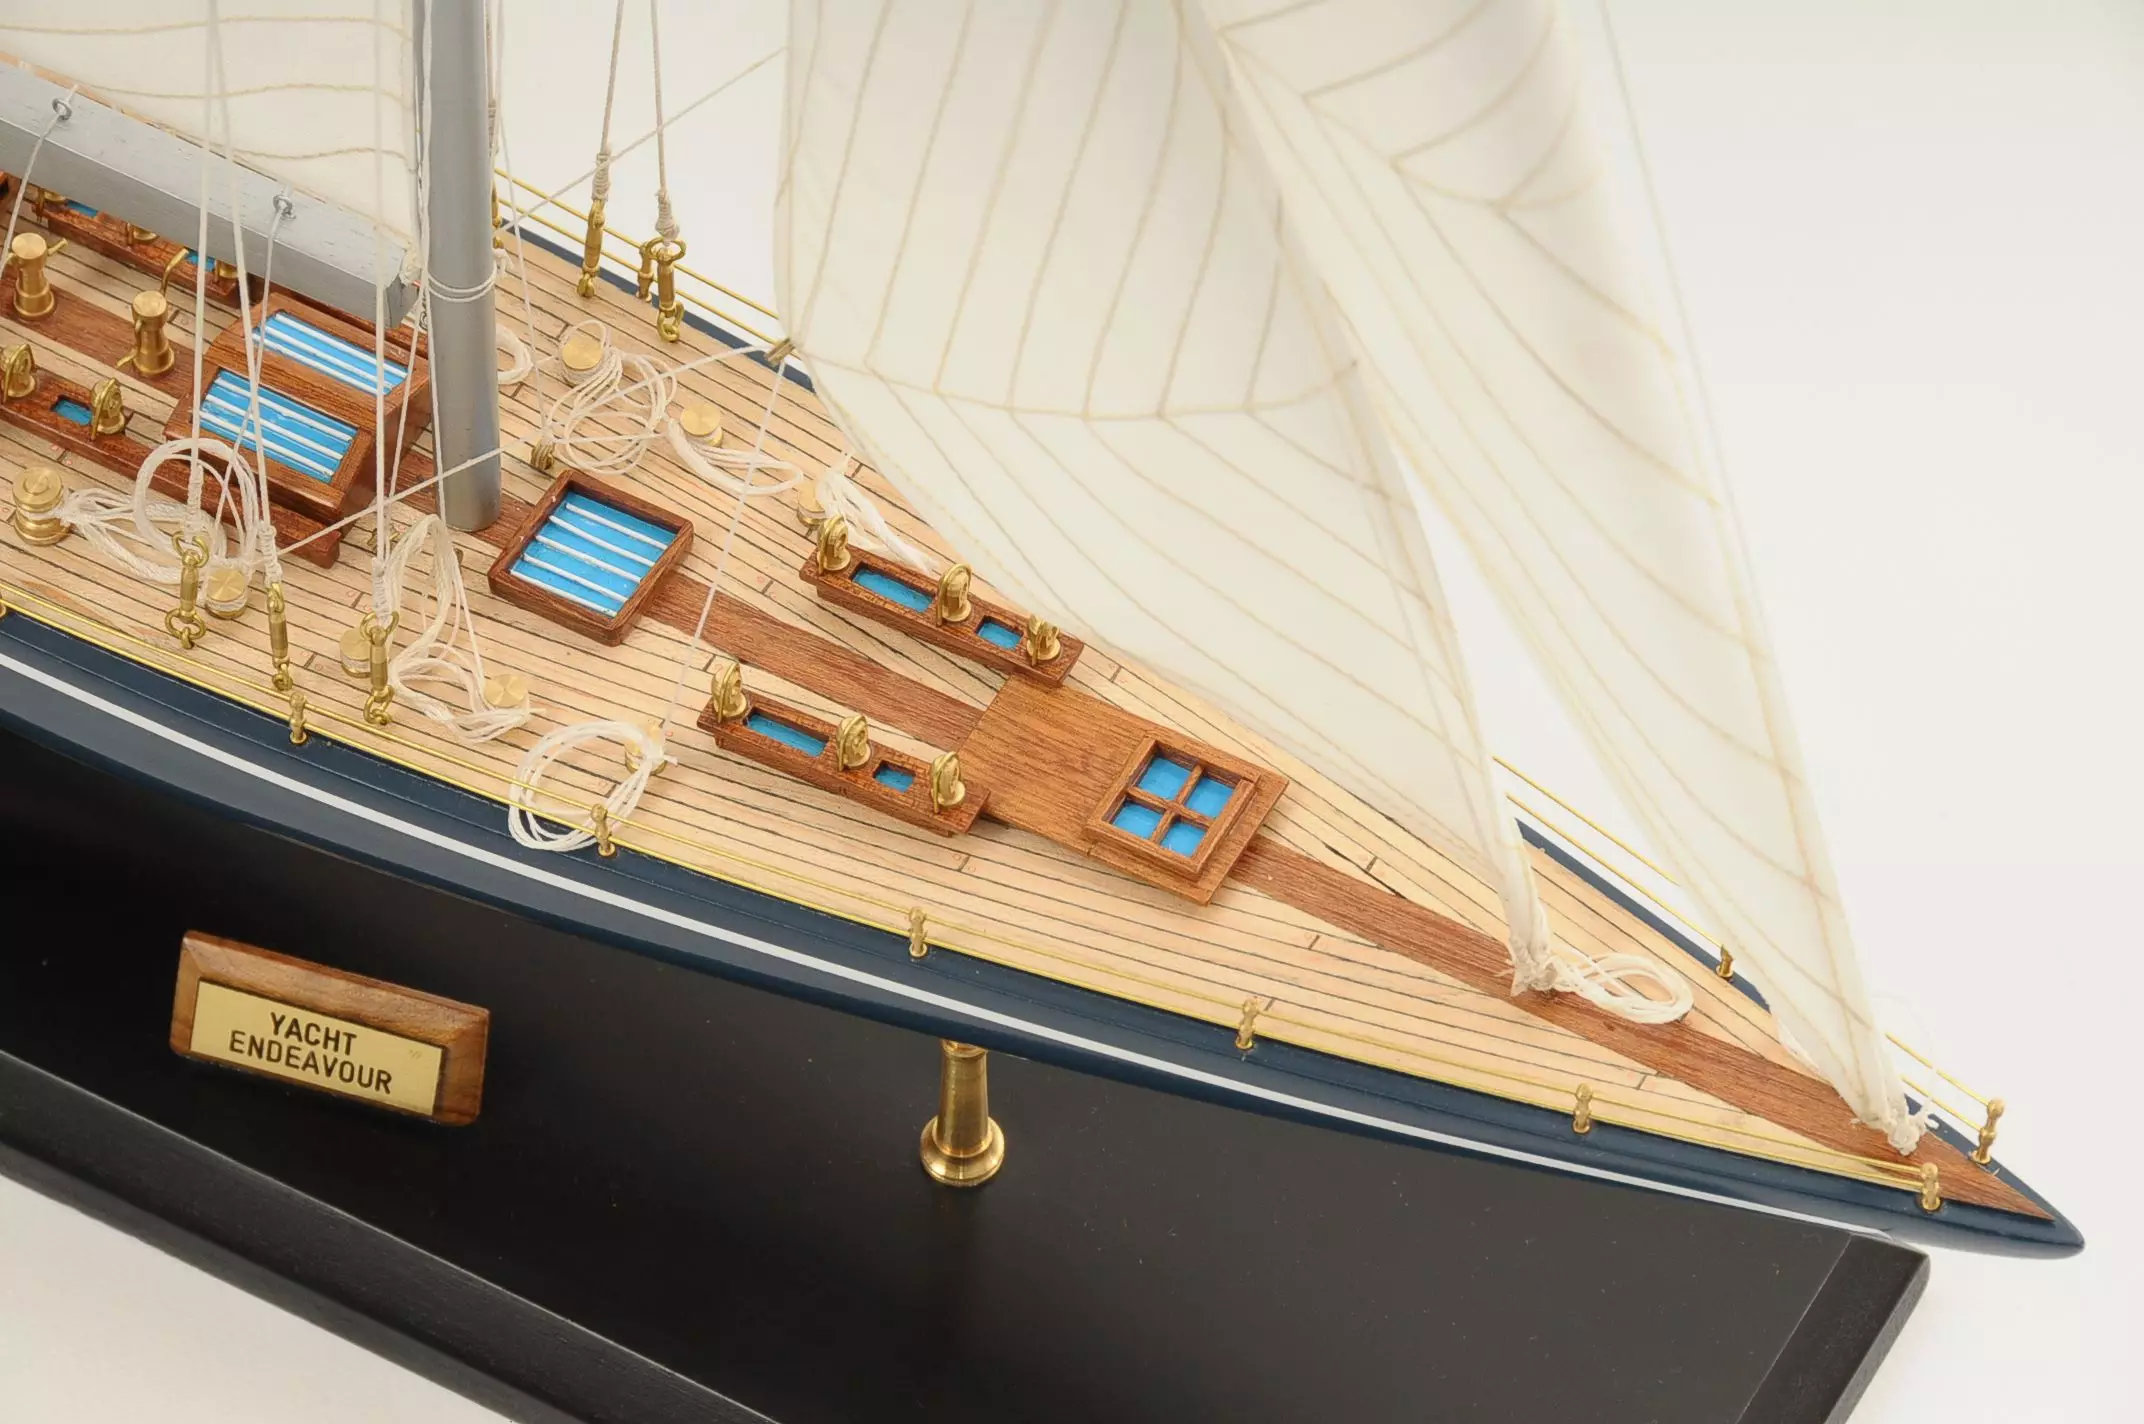 j class model yachts for sale